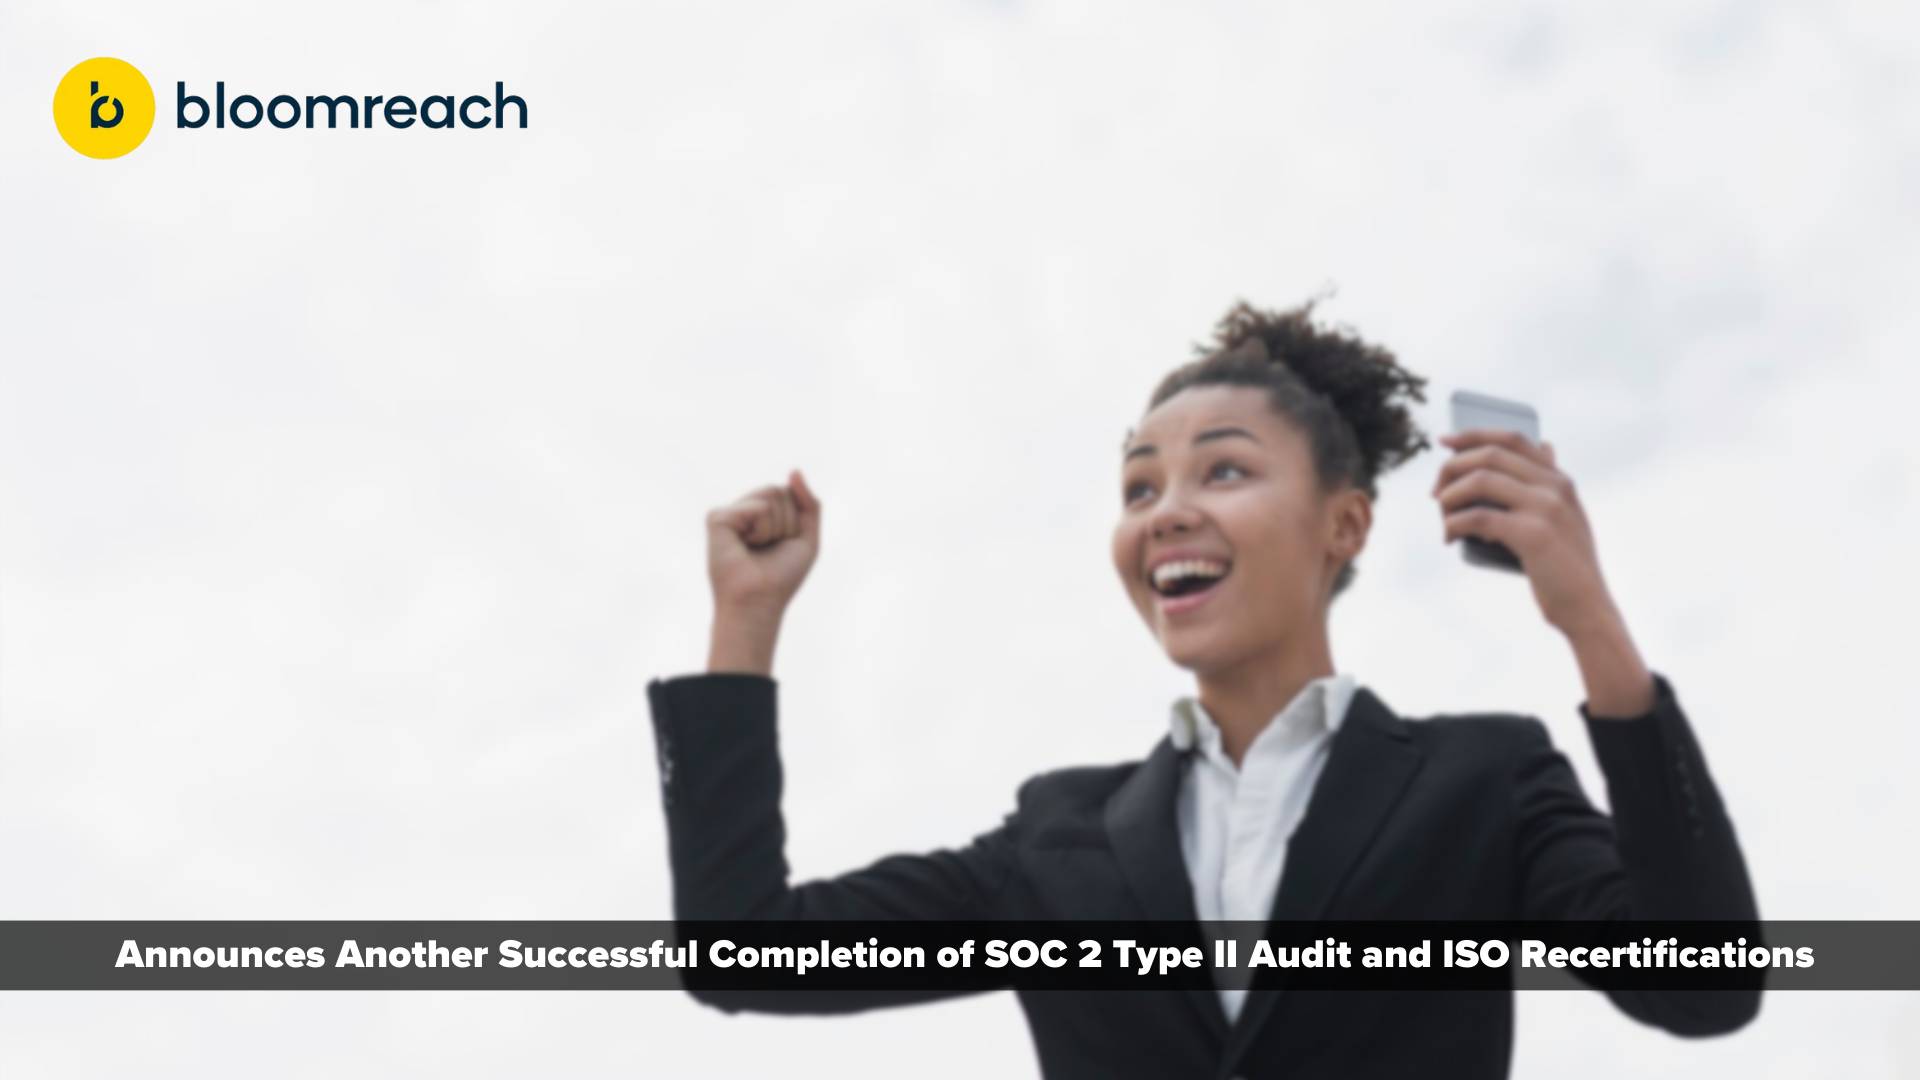 Bloomreach Announces Another Successful Completion of SOC 2 Type II Audit and ISO Recertifications